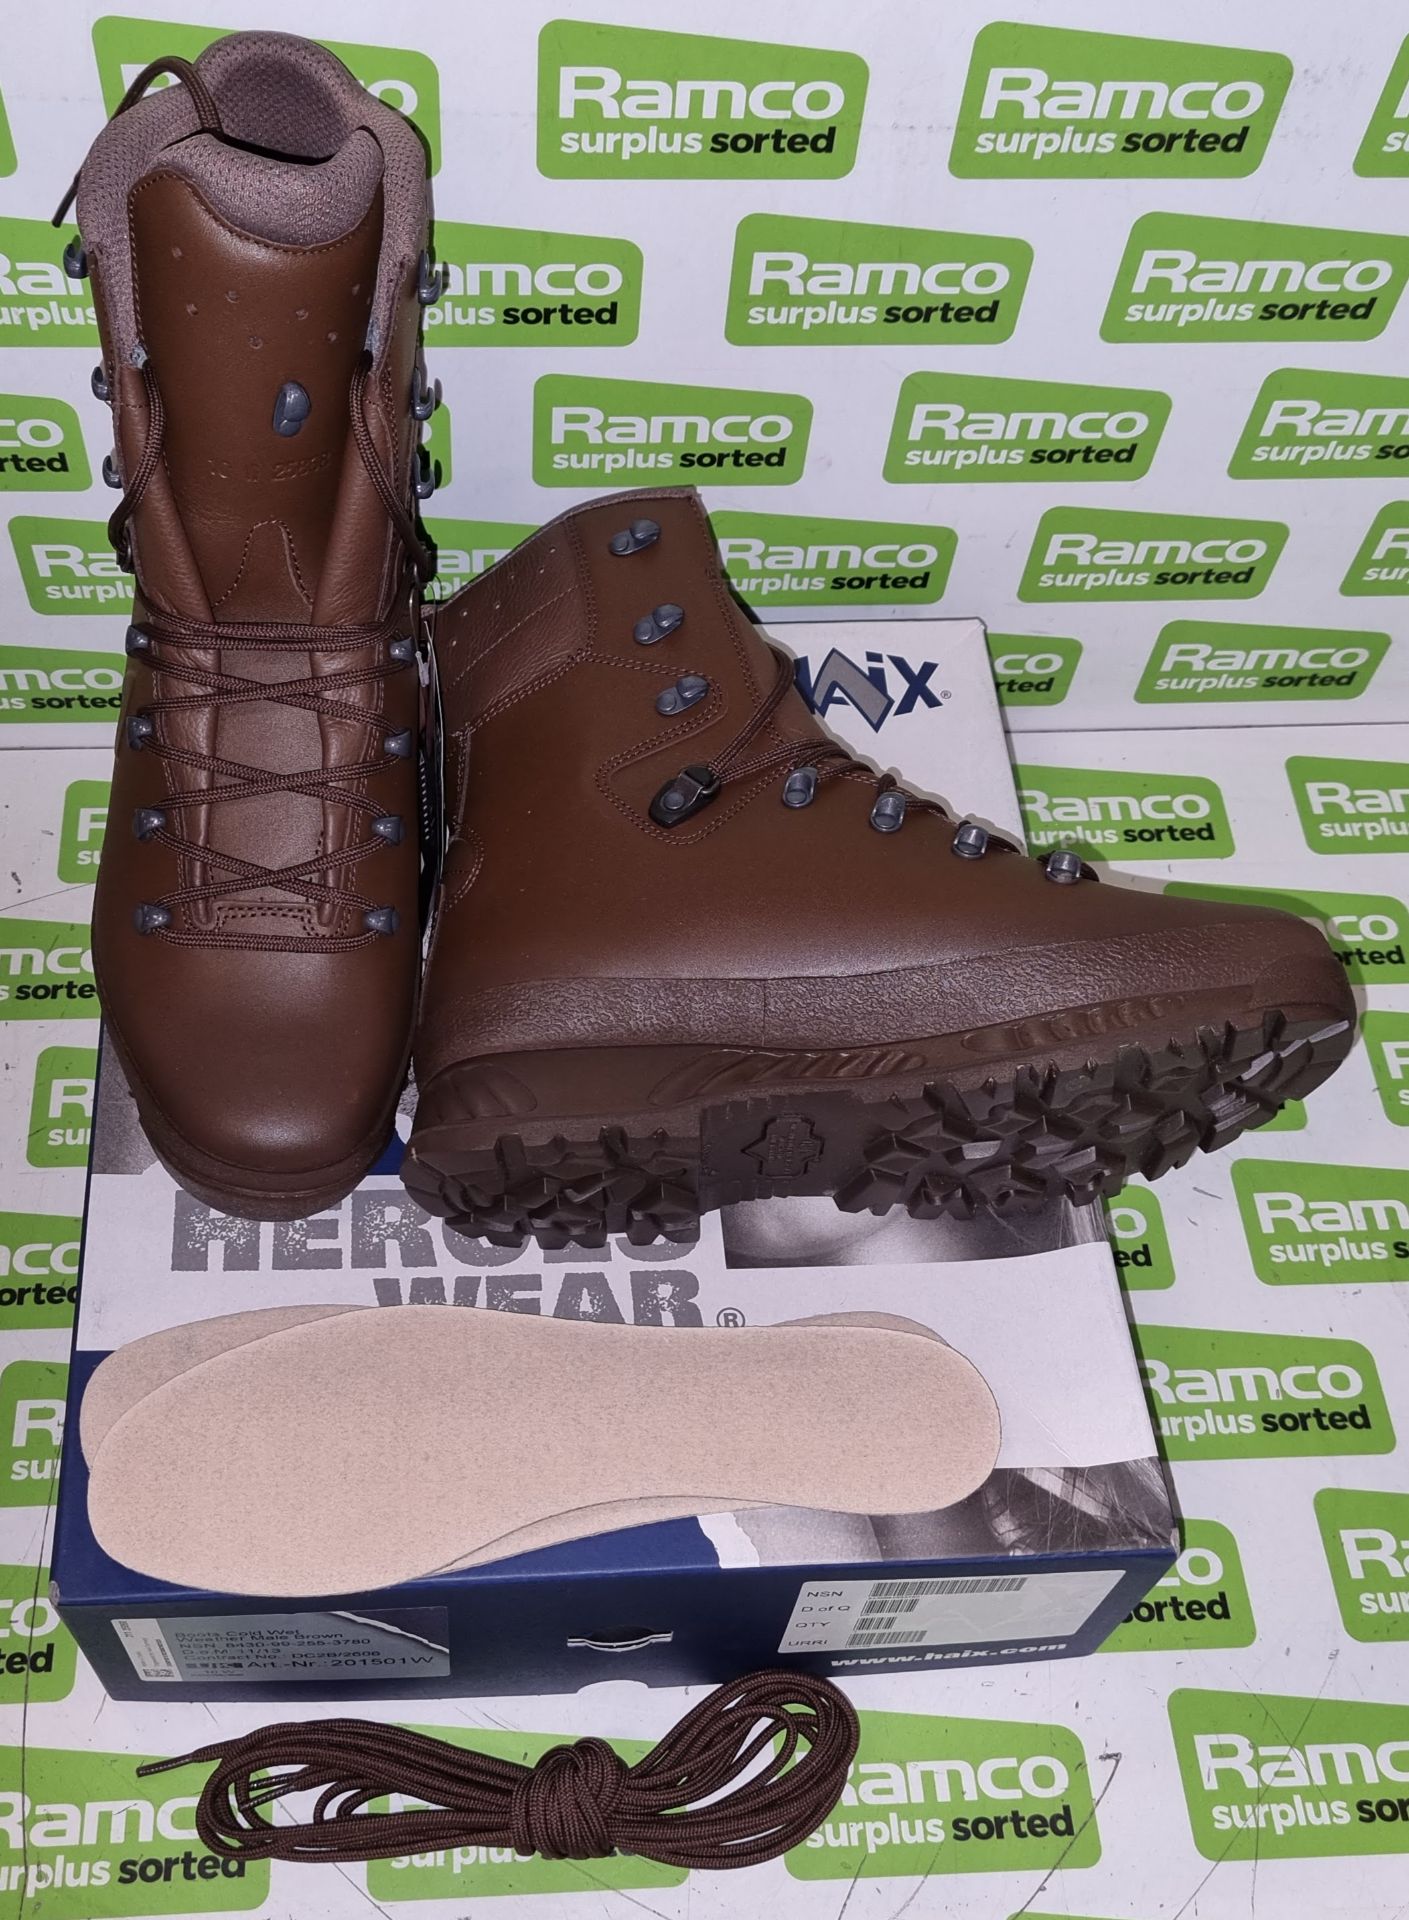 19x pairs of Haix cold wet weather boots - Size 10W